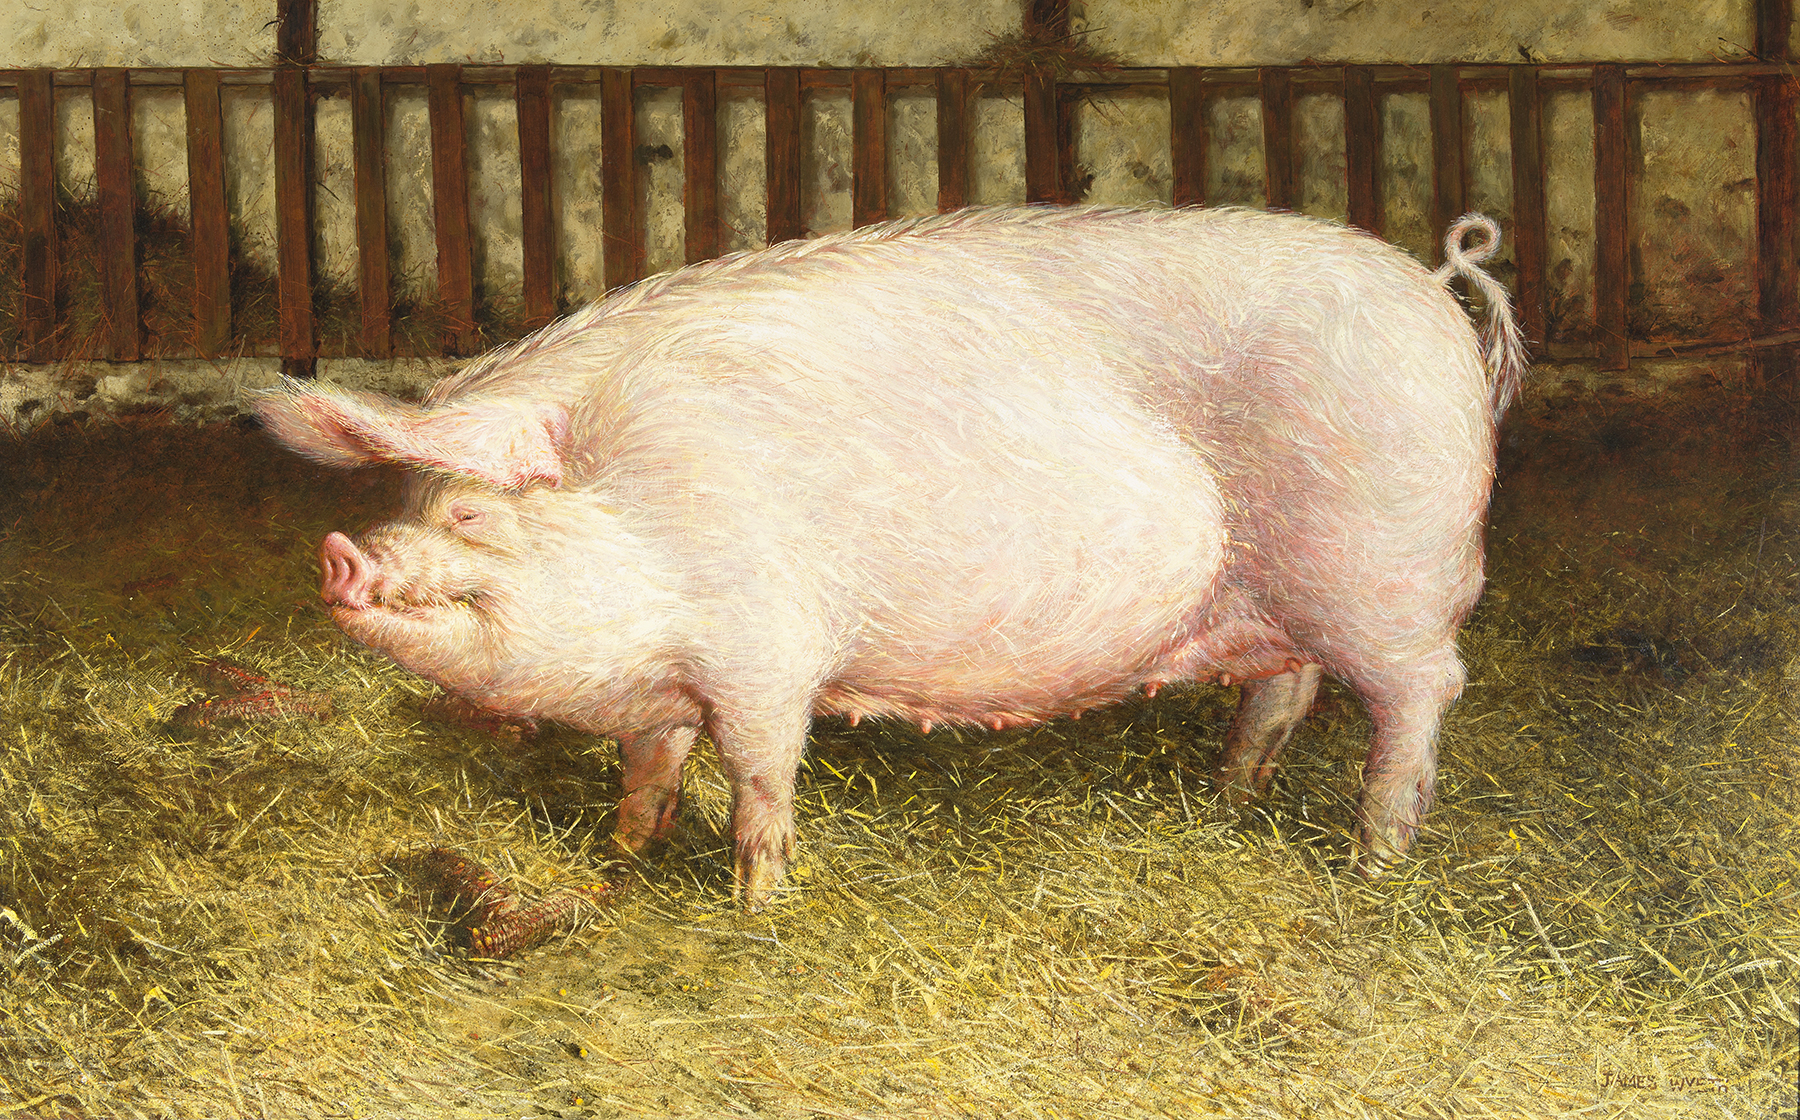 Jamie Wyeth (American, b. 1946), Portrait of Pig, 1970. Oil on canvas, 52 3/8 x 84 5/8 in. Gift of Betsy James Wyeth. © Jamie Wyeth / Artists Rights Society (ARS), New York